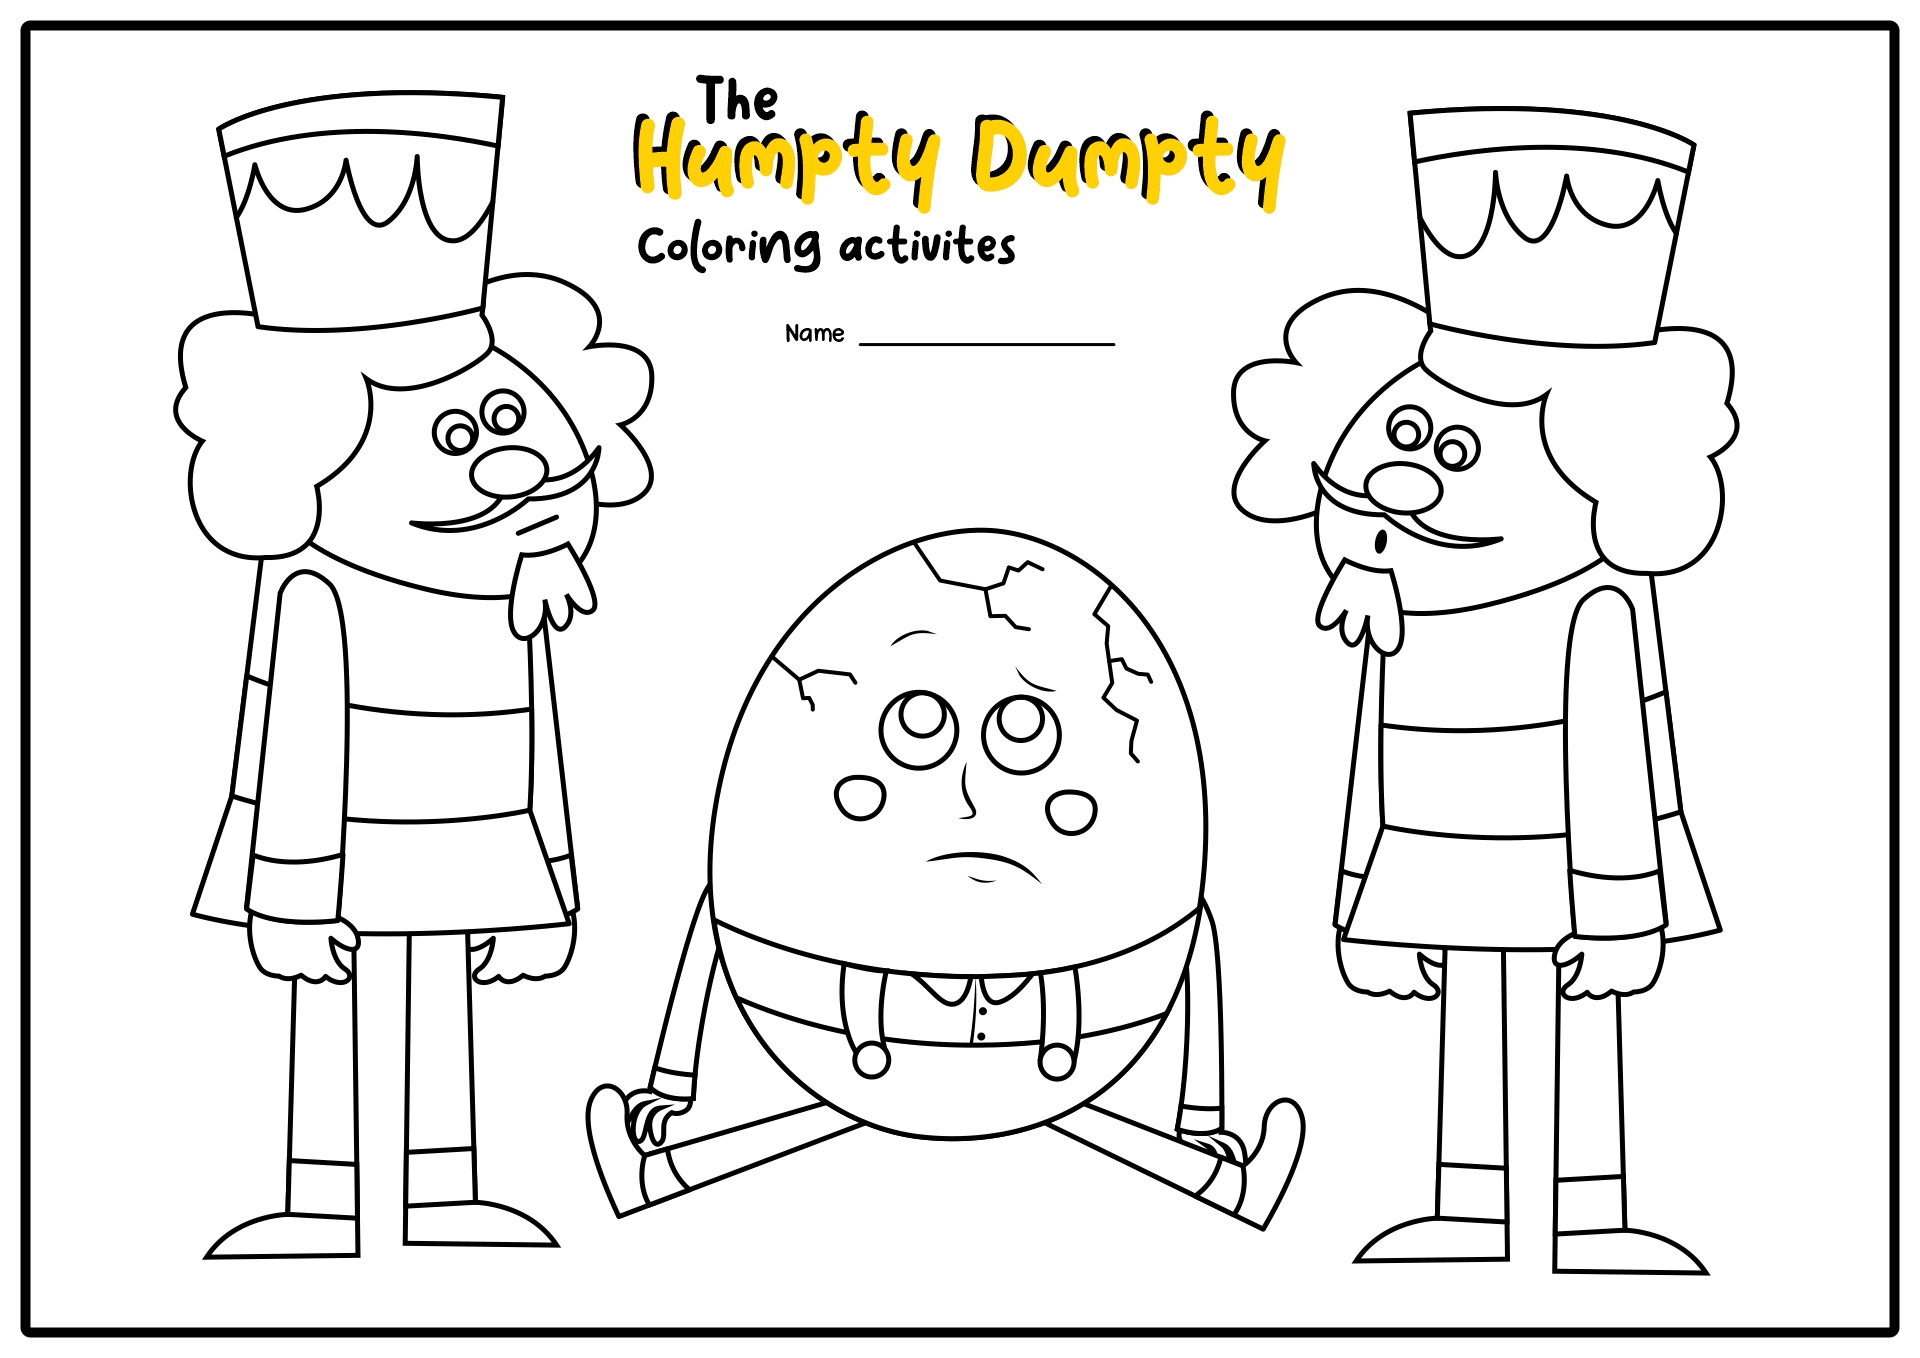 Humpty Dumpty Coloring Page Image